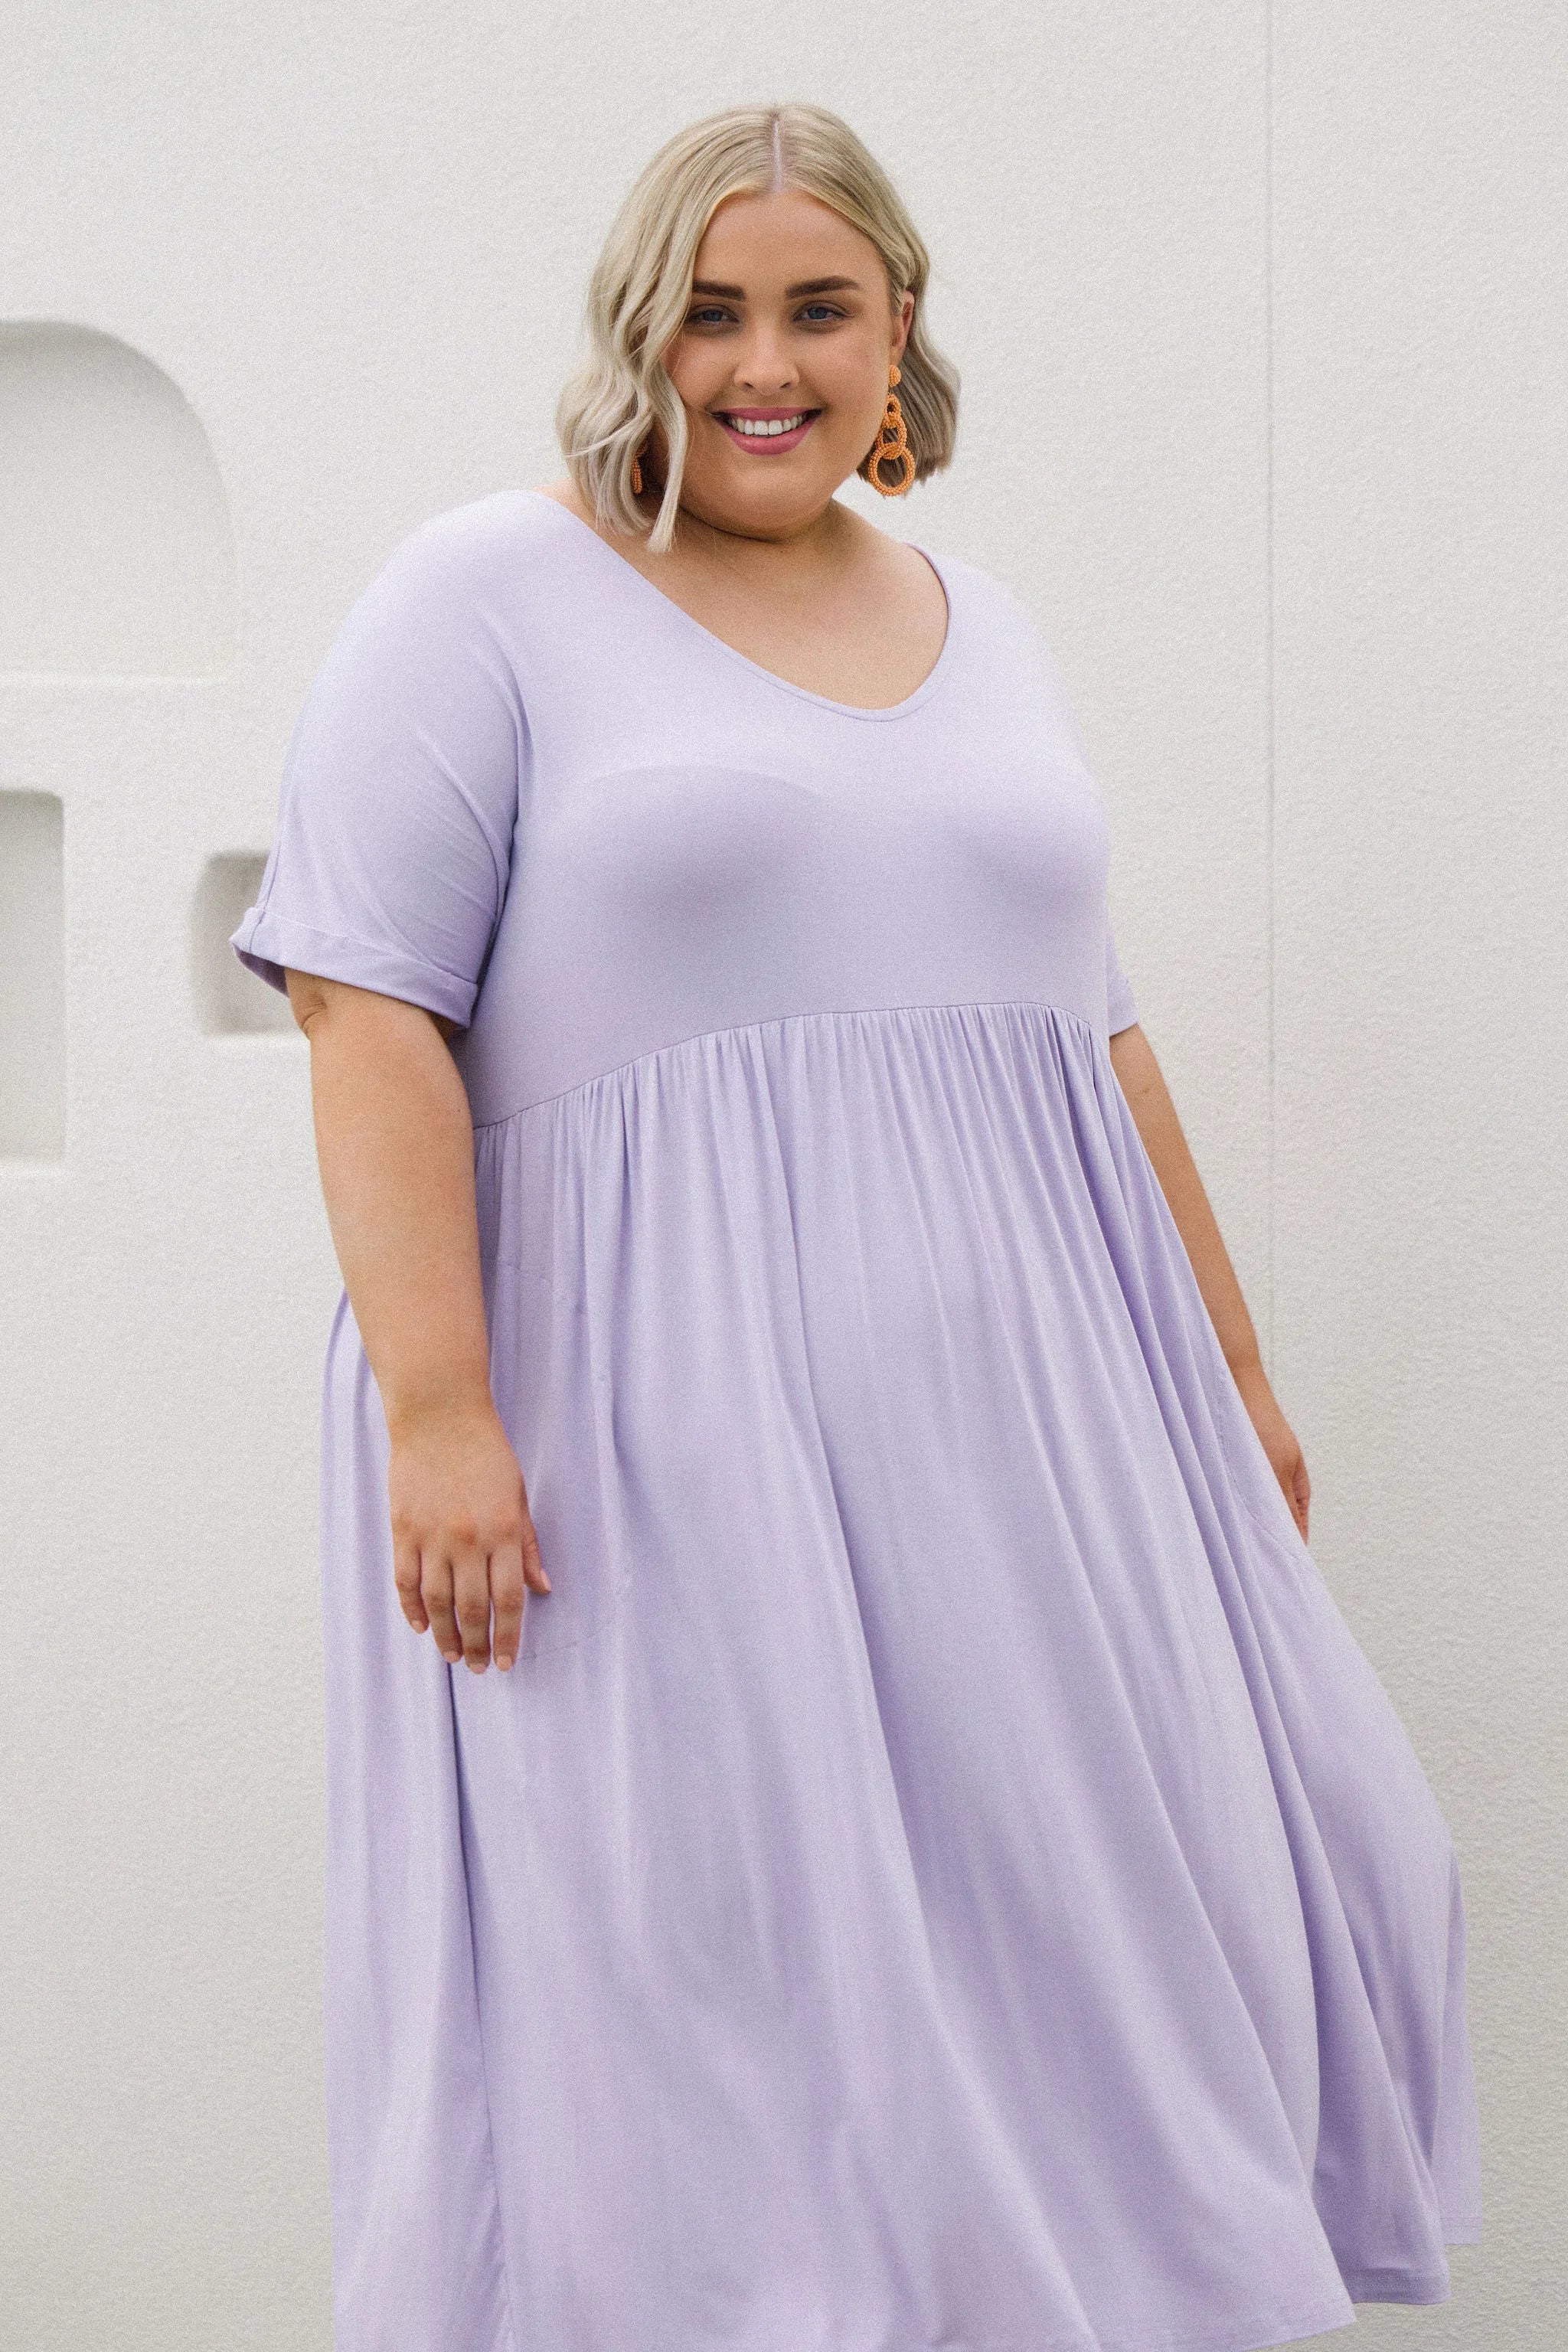 Fashionable Plus Size Lilac Dress - Ashleigh Dress by Peach The Label